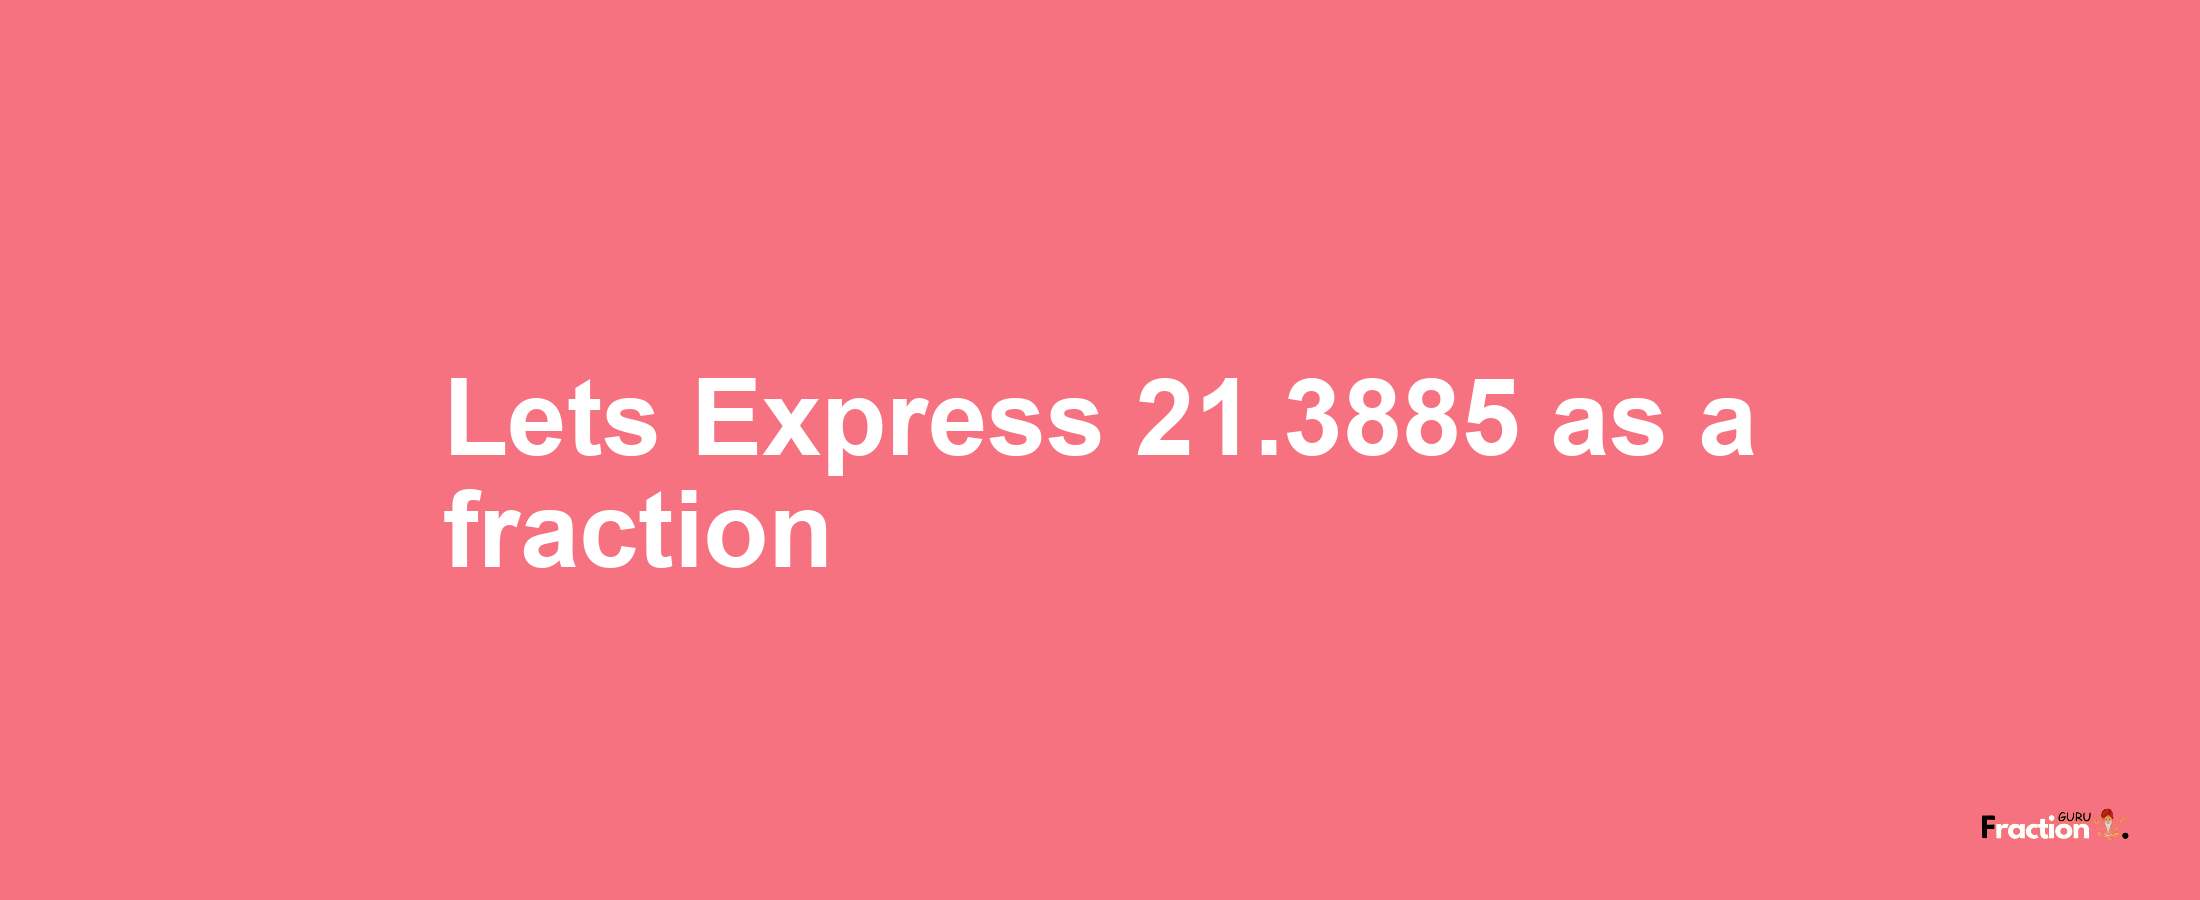 Lets Express 21.3885 as afraction